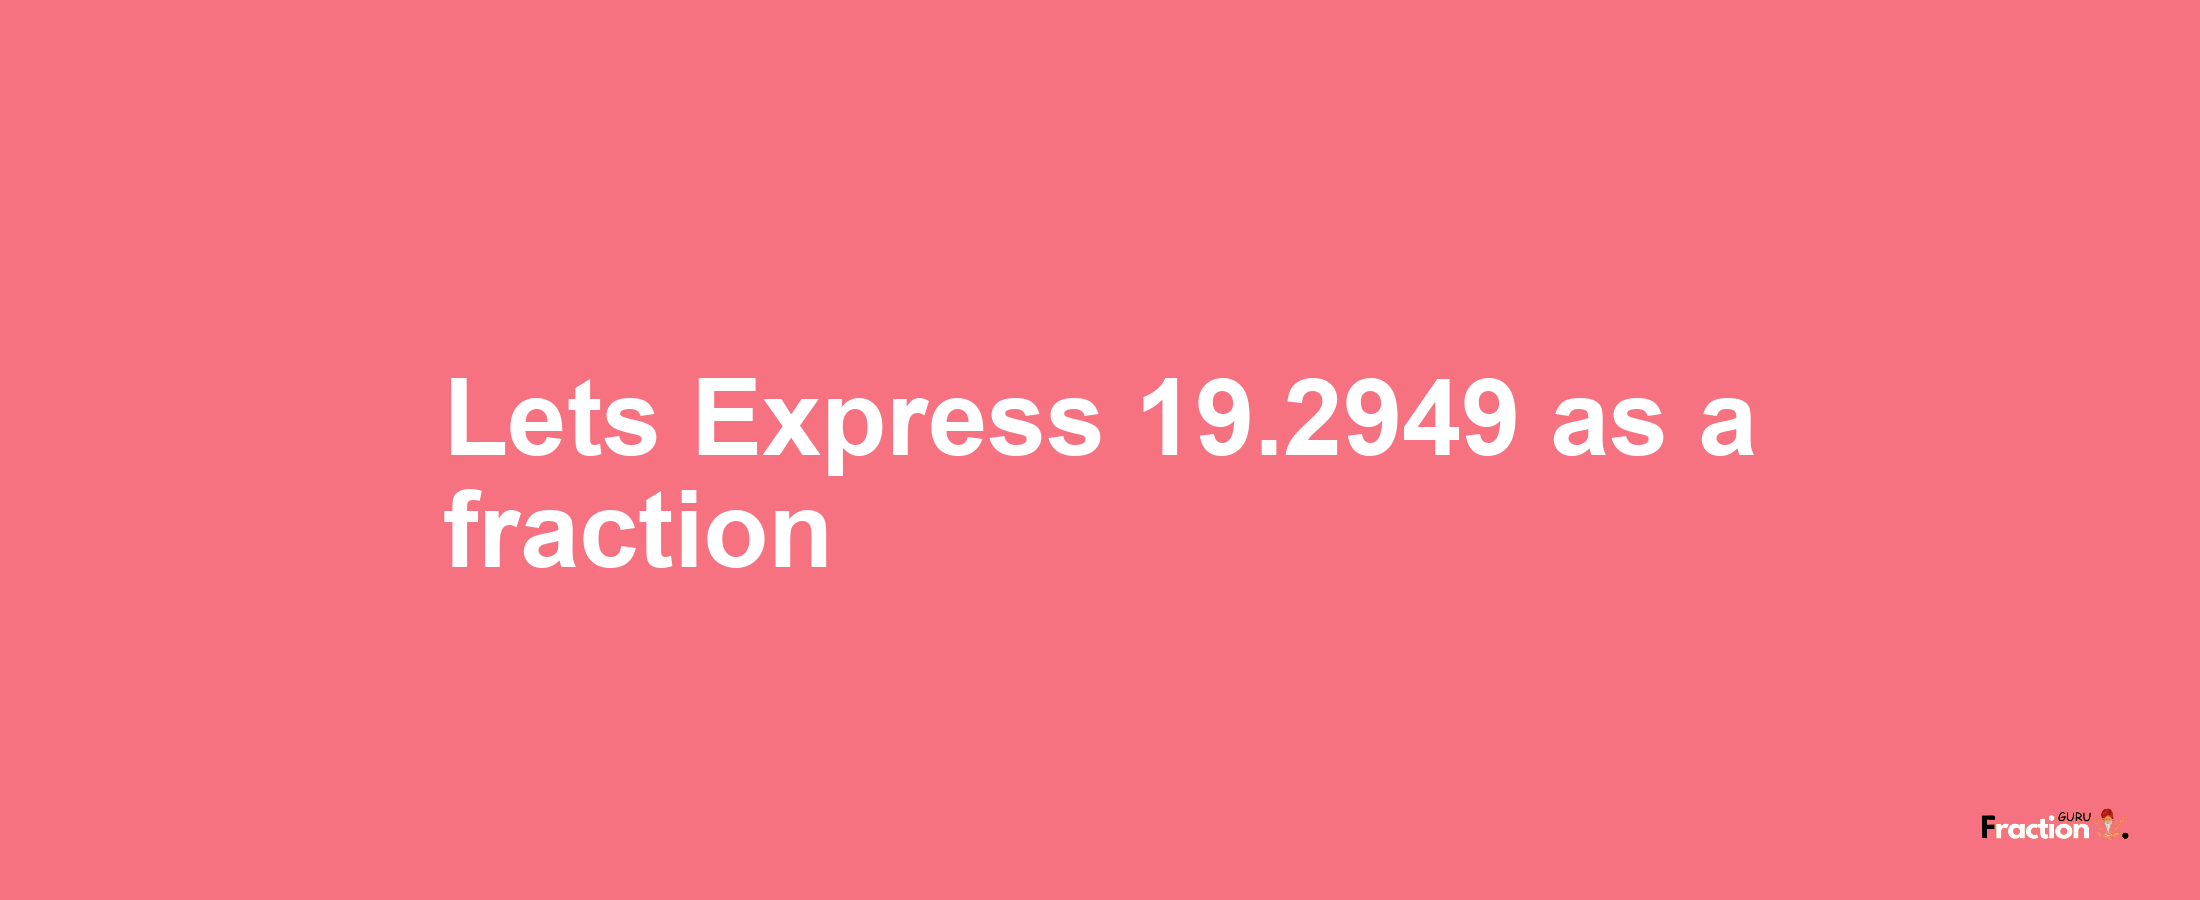 Lets Express 19.2949 as afraction